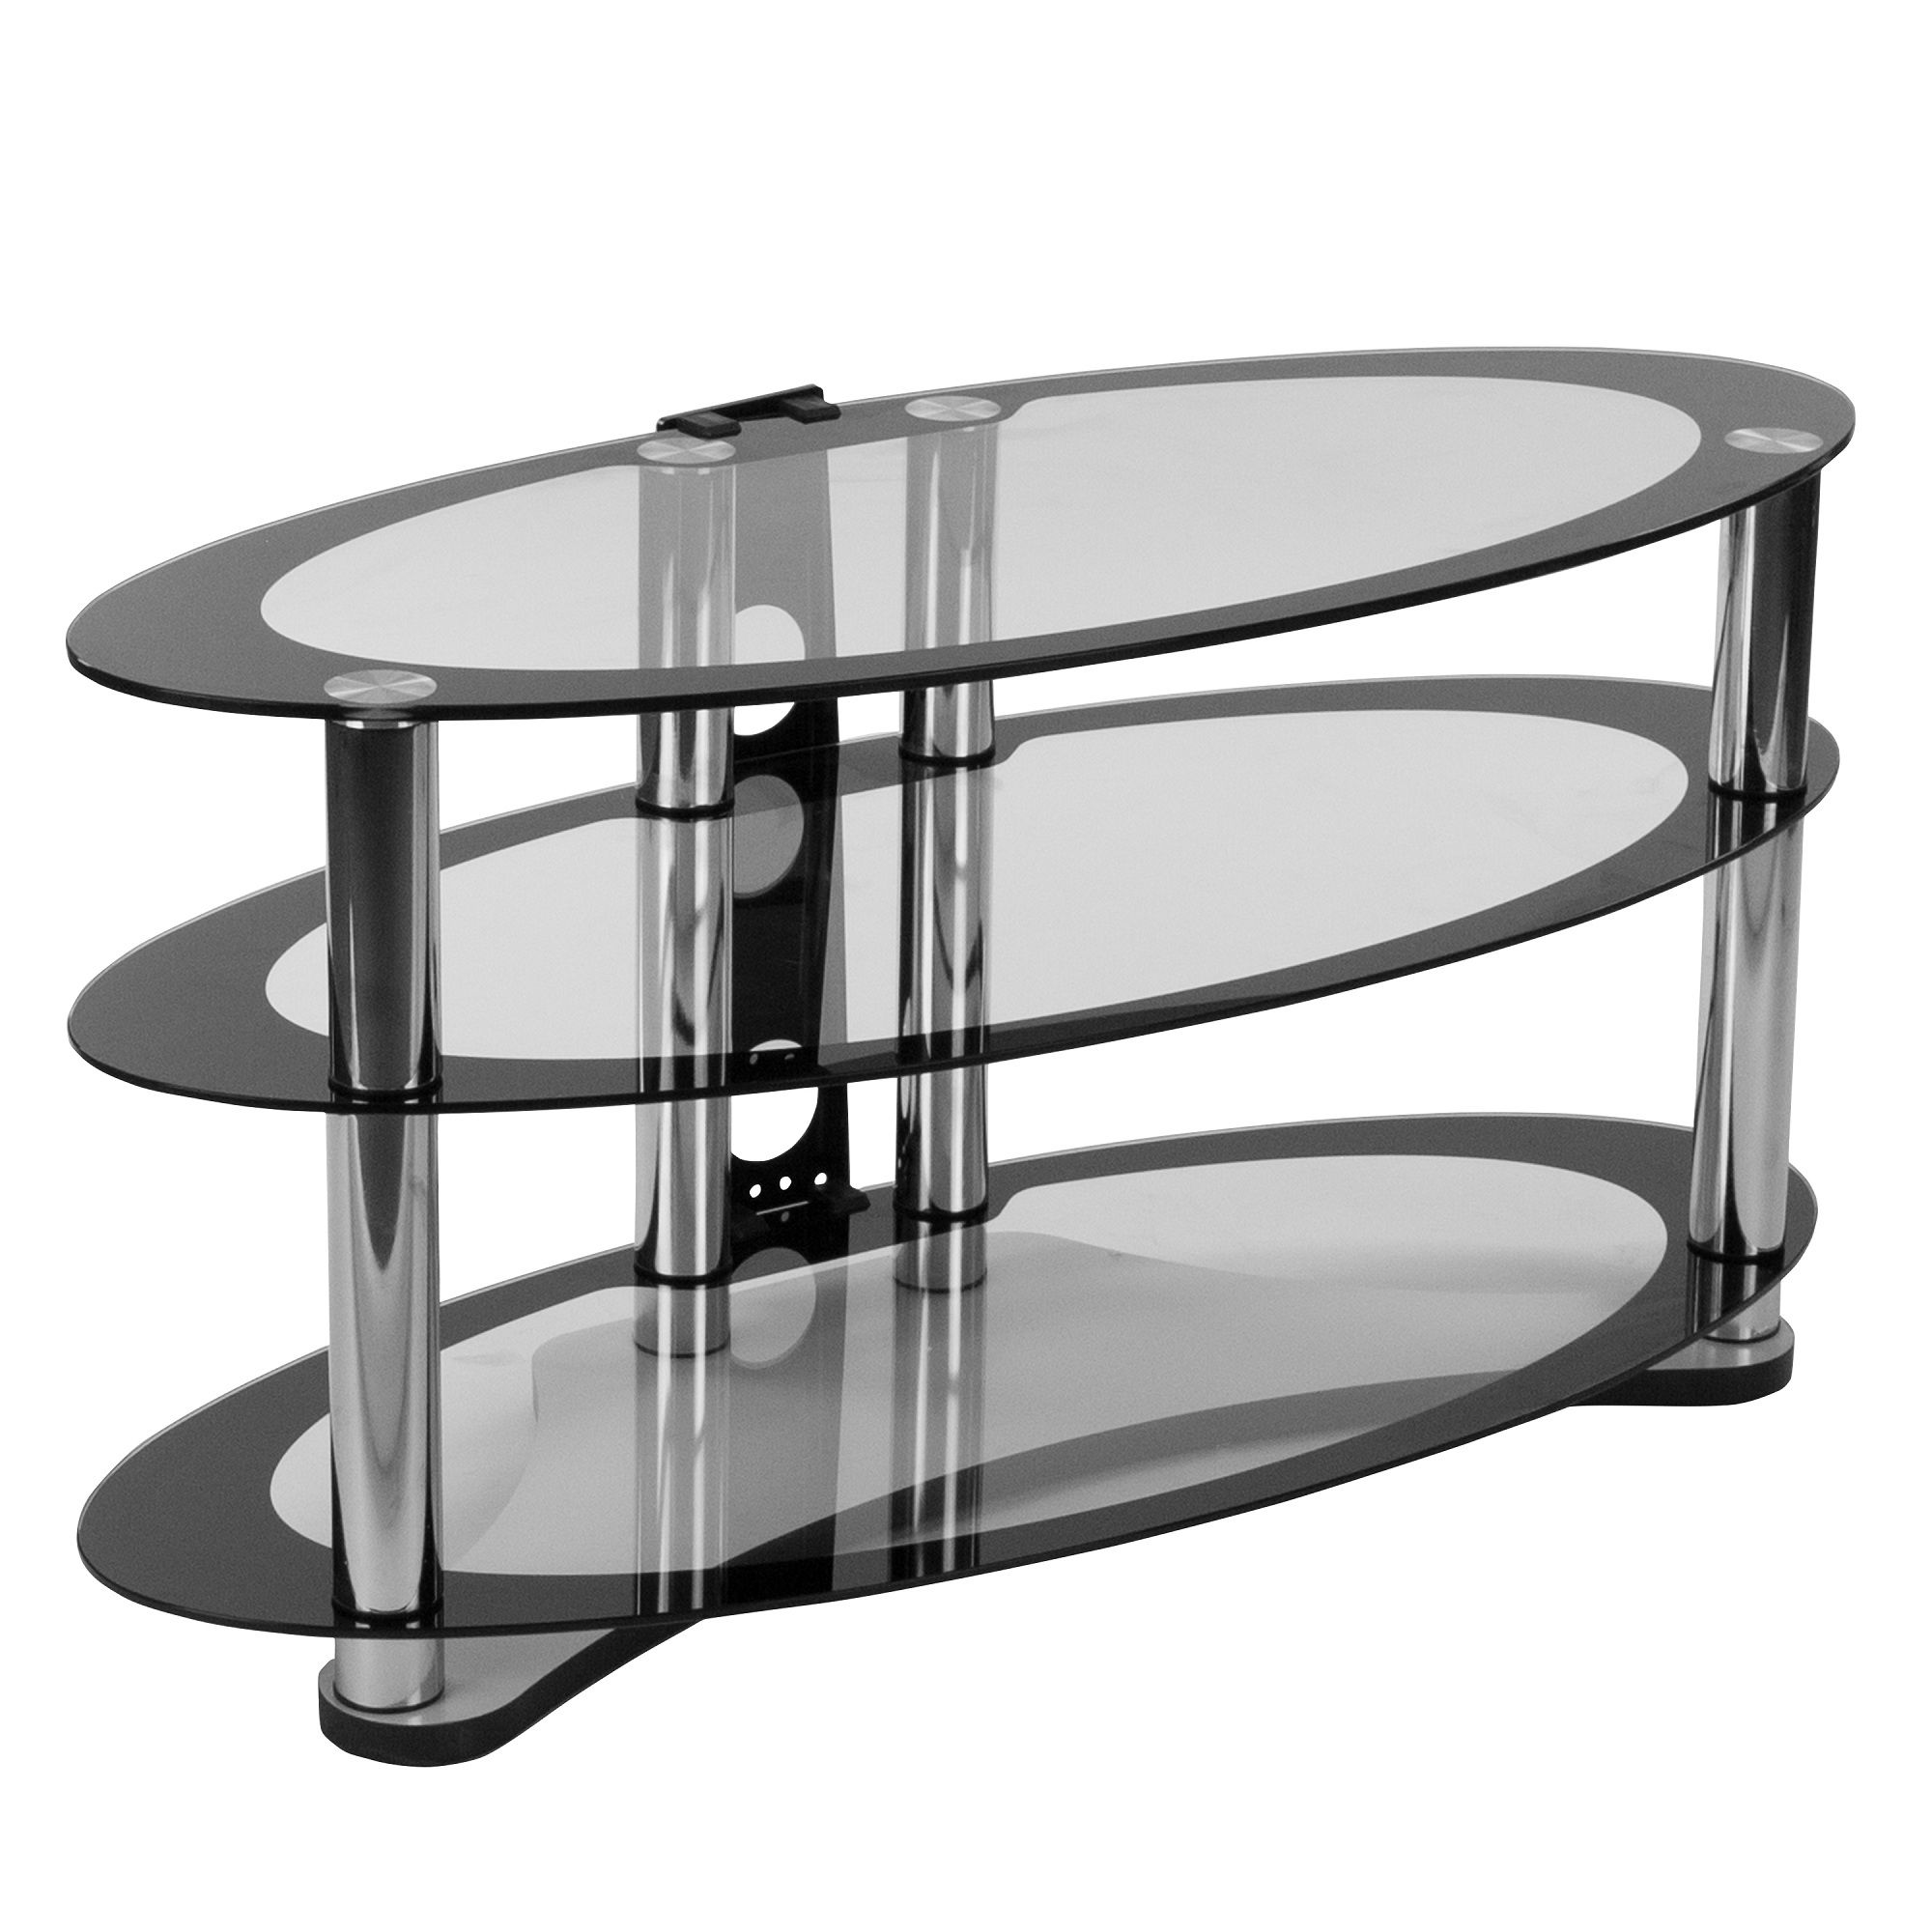 39" Black And Chrome Contemporary Two Tone Glass Oval Regarding Contemporary Glass Tv Stands (View 12 of 15)